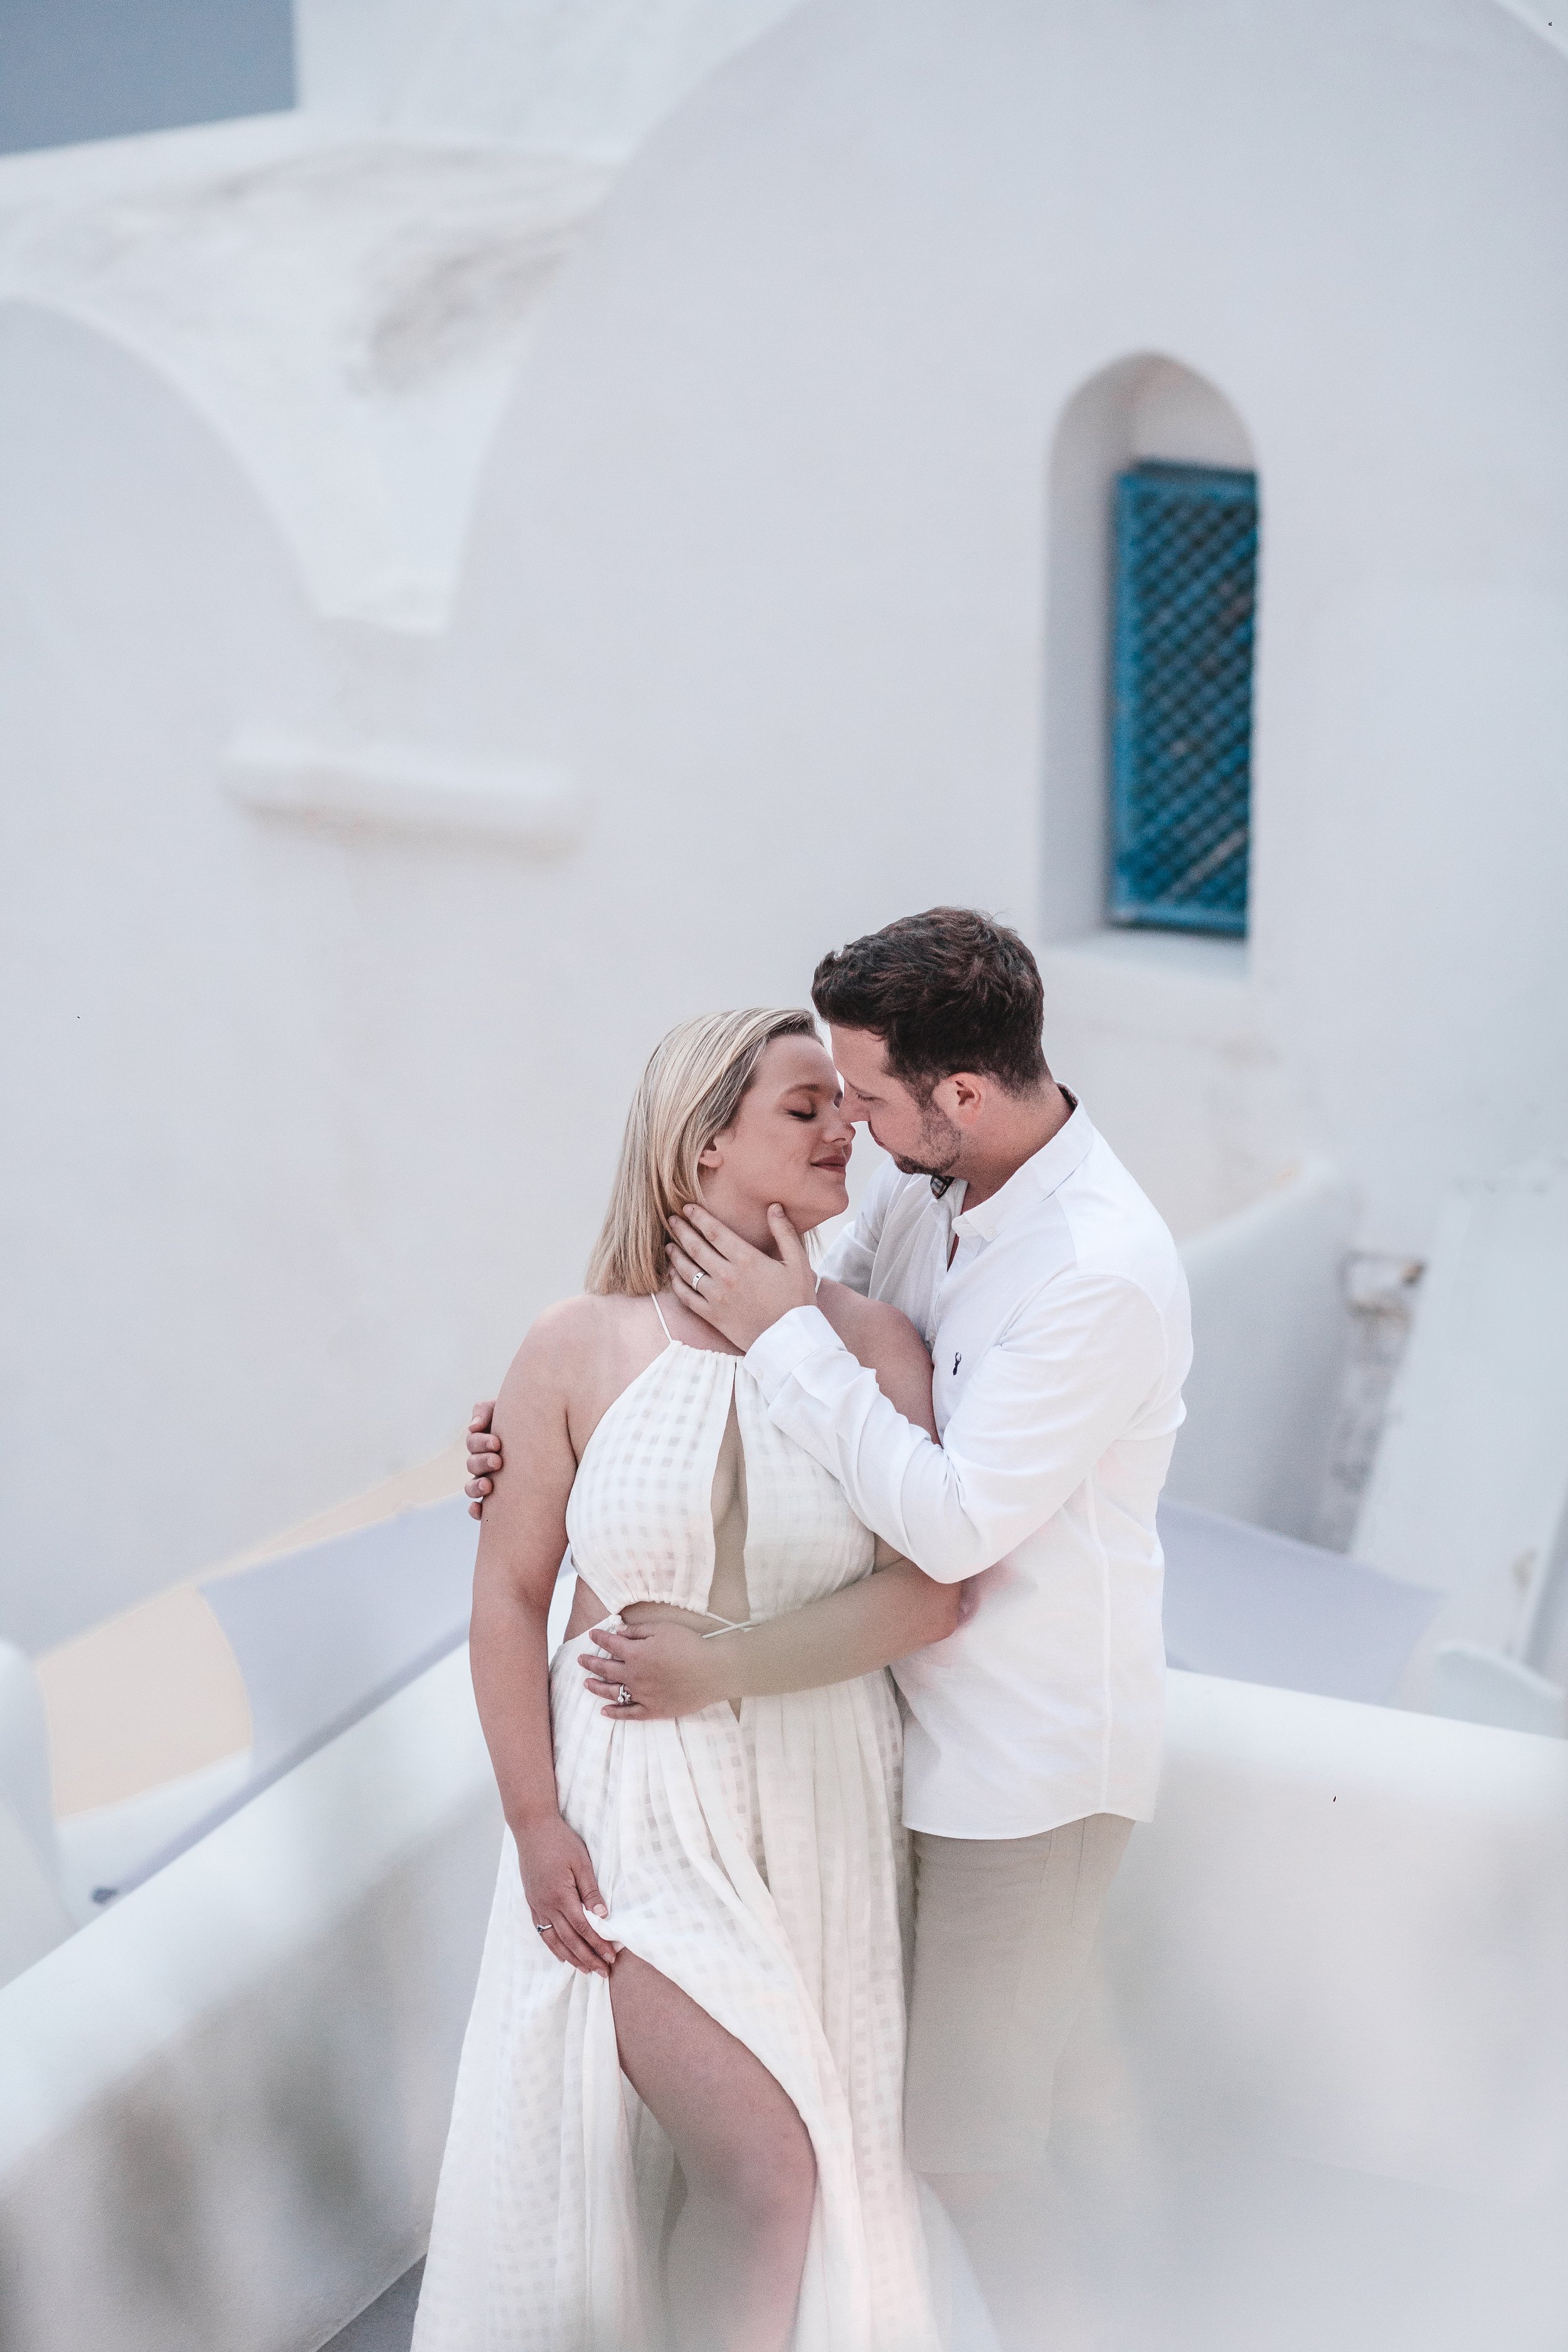 Wedding couple elopement by the blue dome churches of Santorini island, Greece